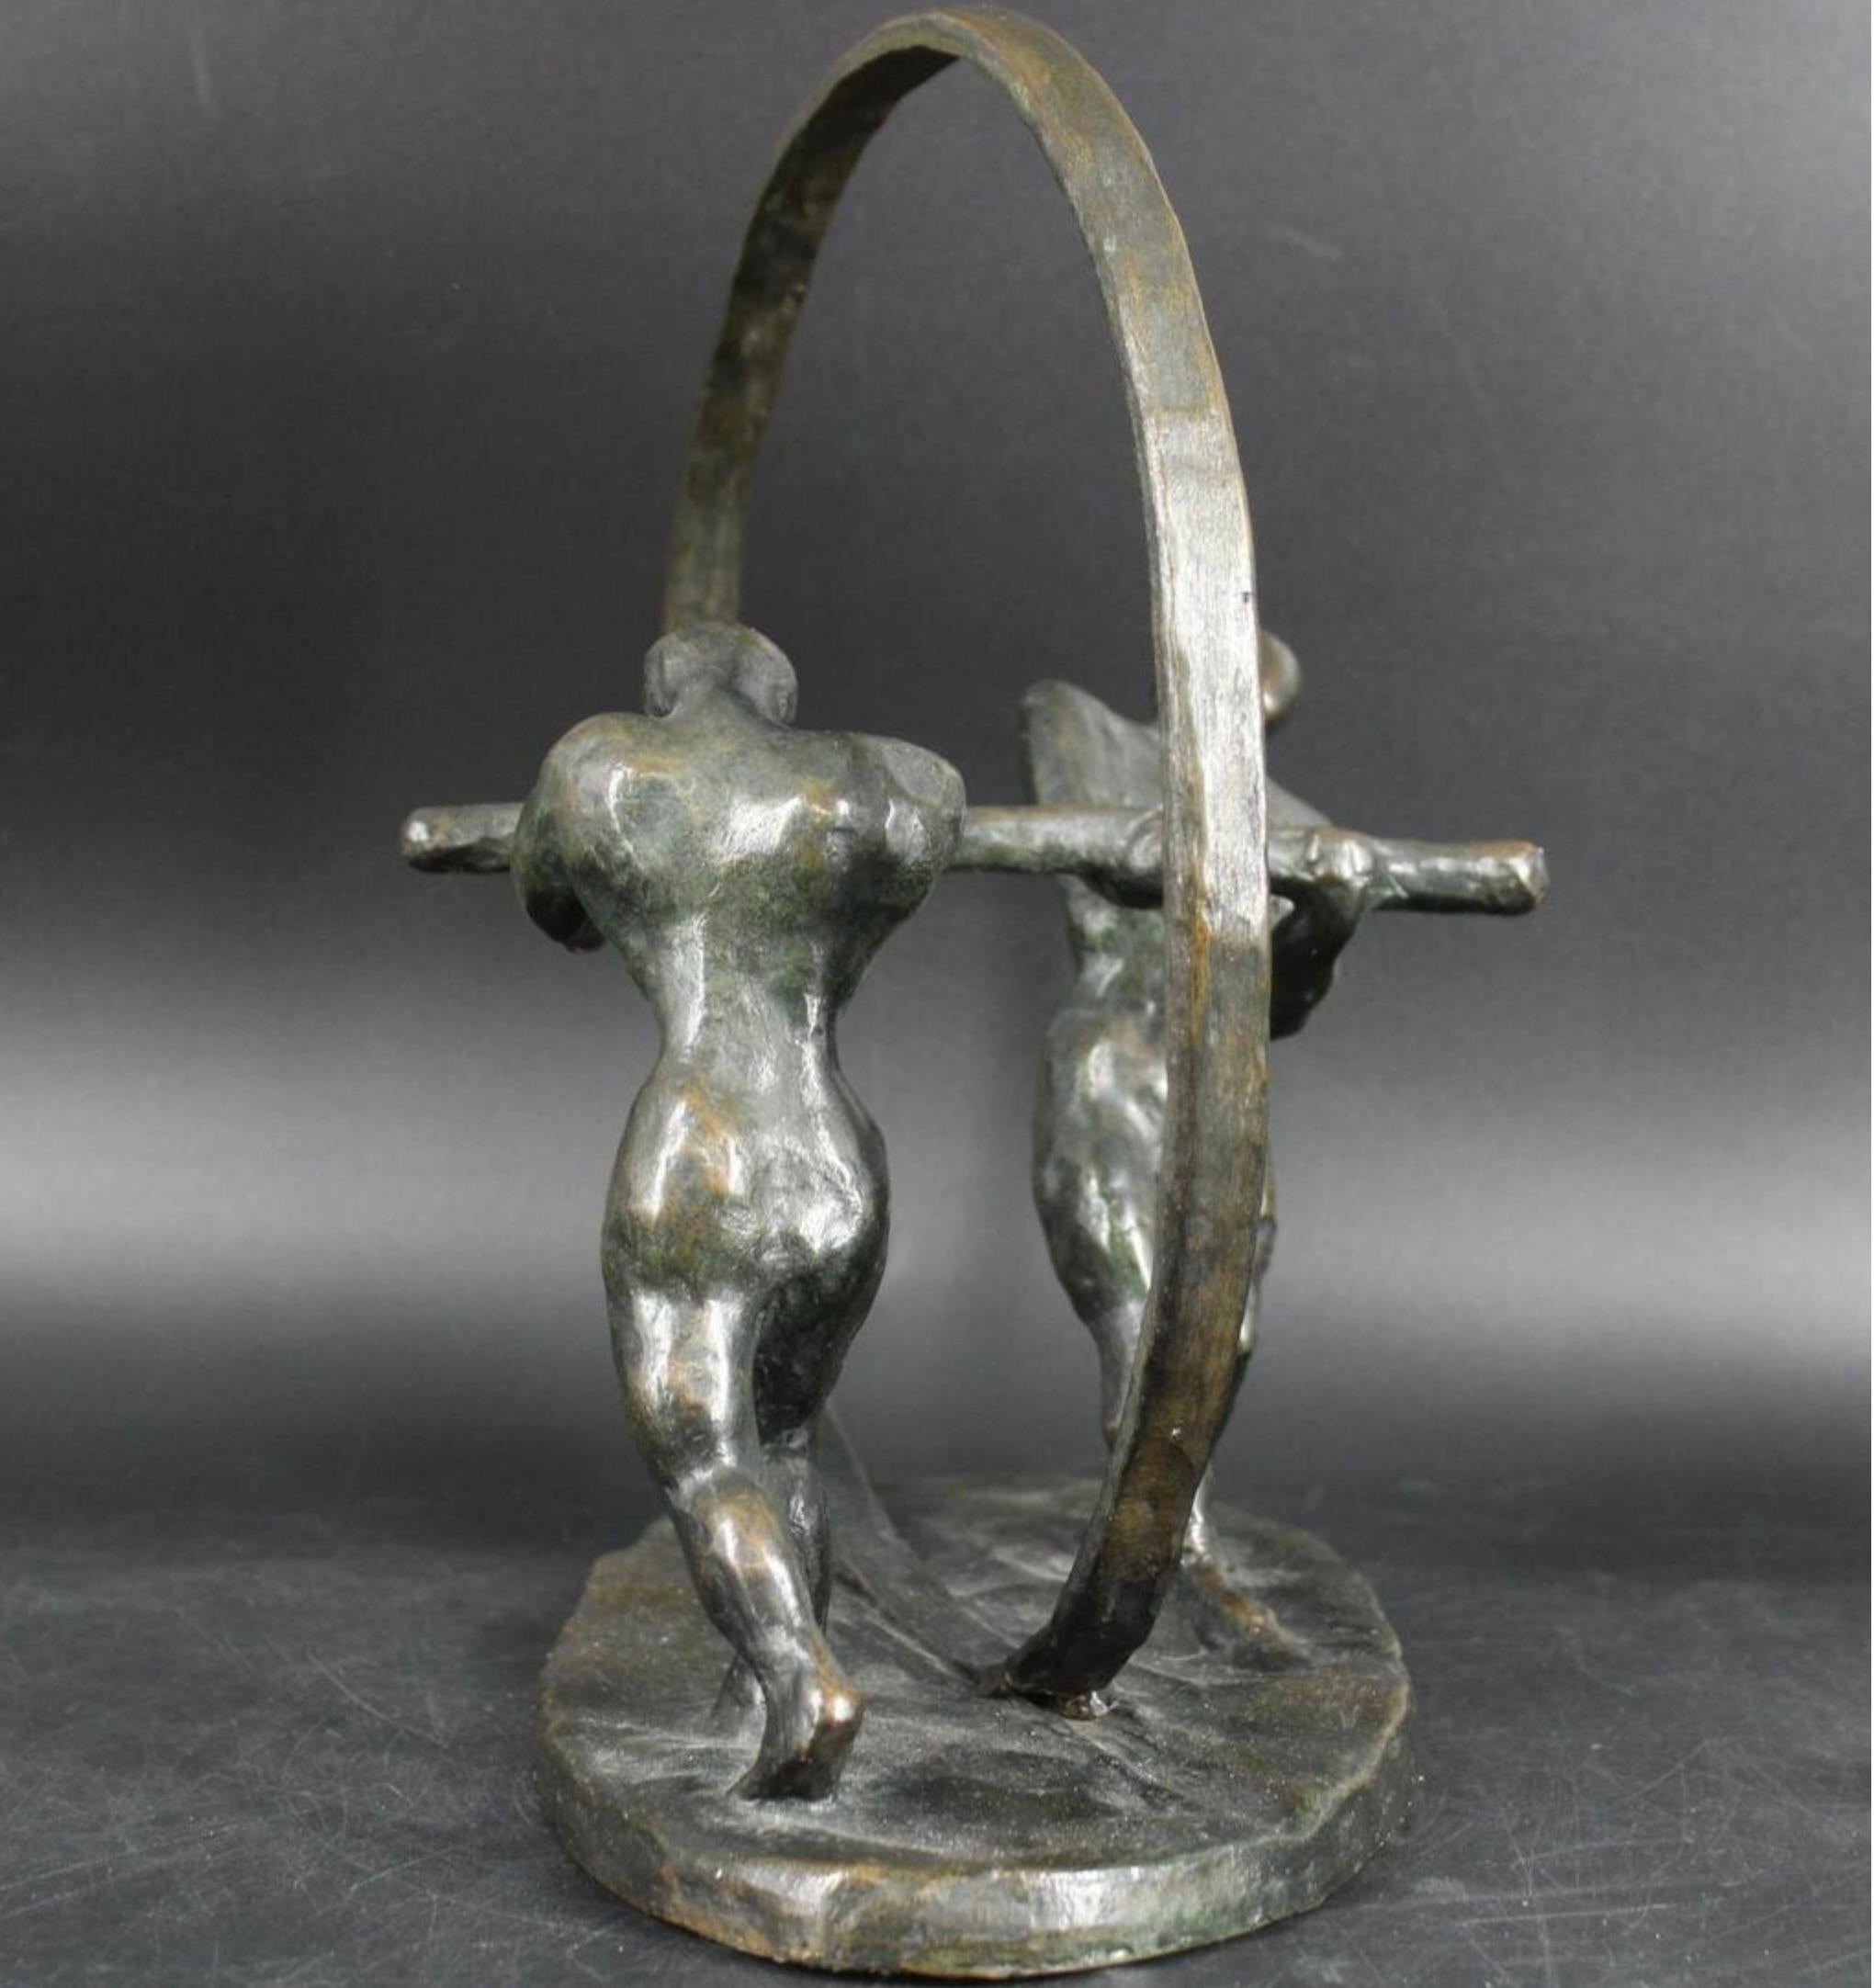 1963 Roman Bronze Works Figurative Bronze Signed J.E.M. In Good Condition For Sale In Palm Springs, CA